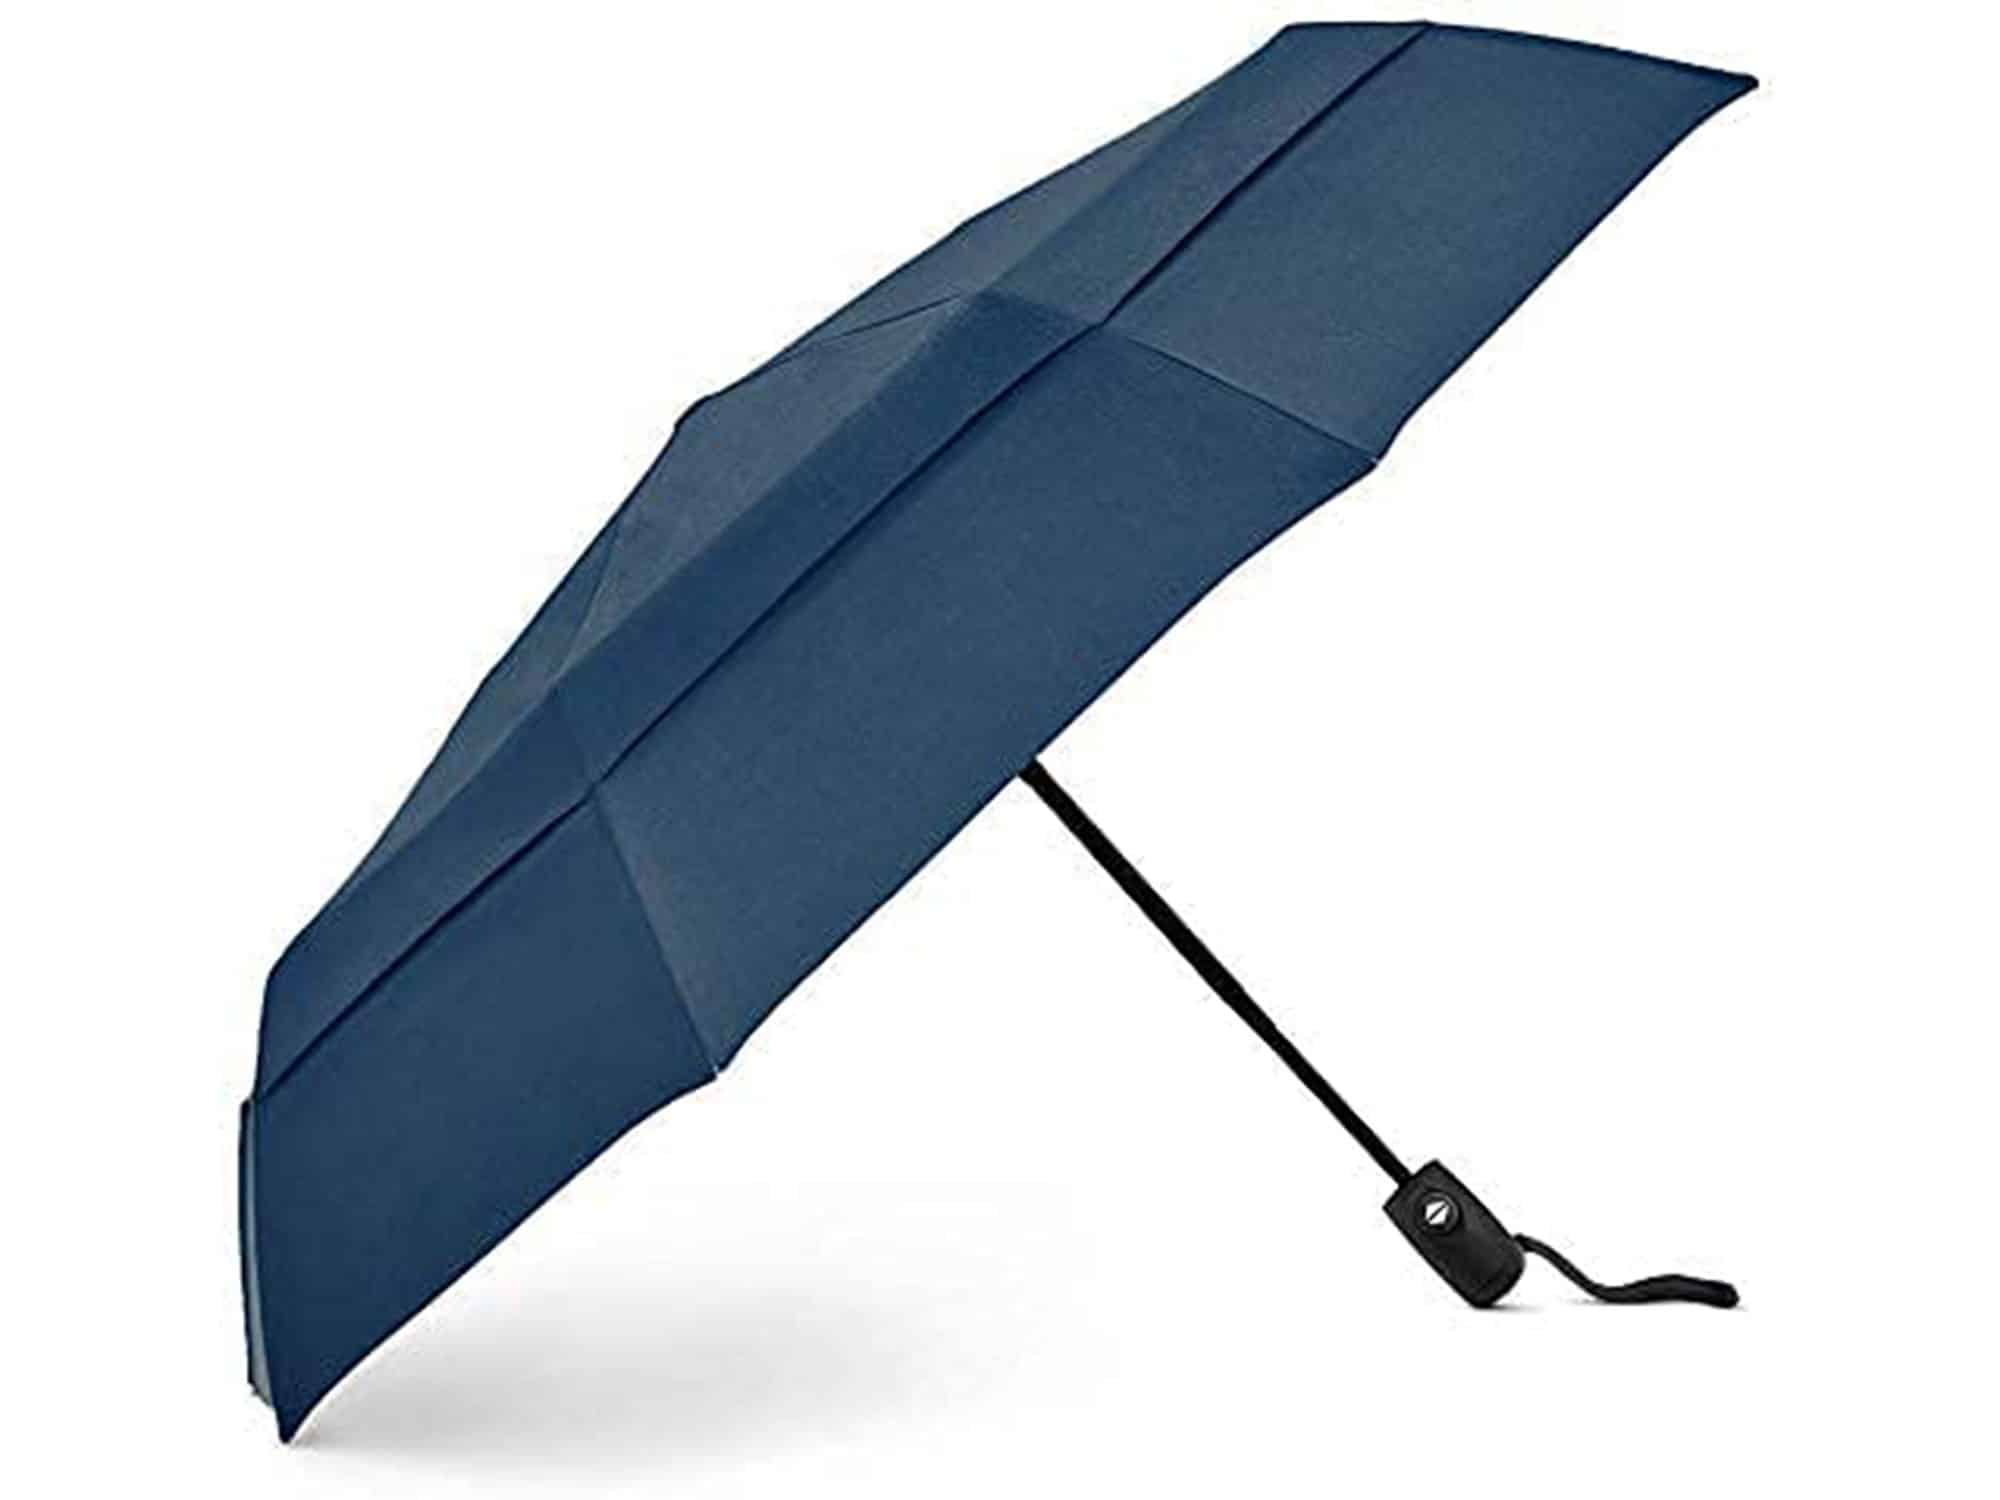 EEZ-Y Windproof Travel Umbrellas for Rain - Lightweight, Strong, Compact with & Easy Auto Open/Close Button for Single Hand Use - Double Vented Canopy for Men & Women